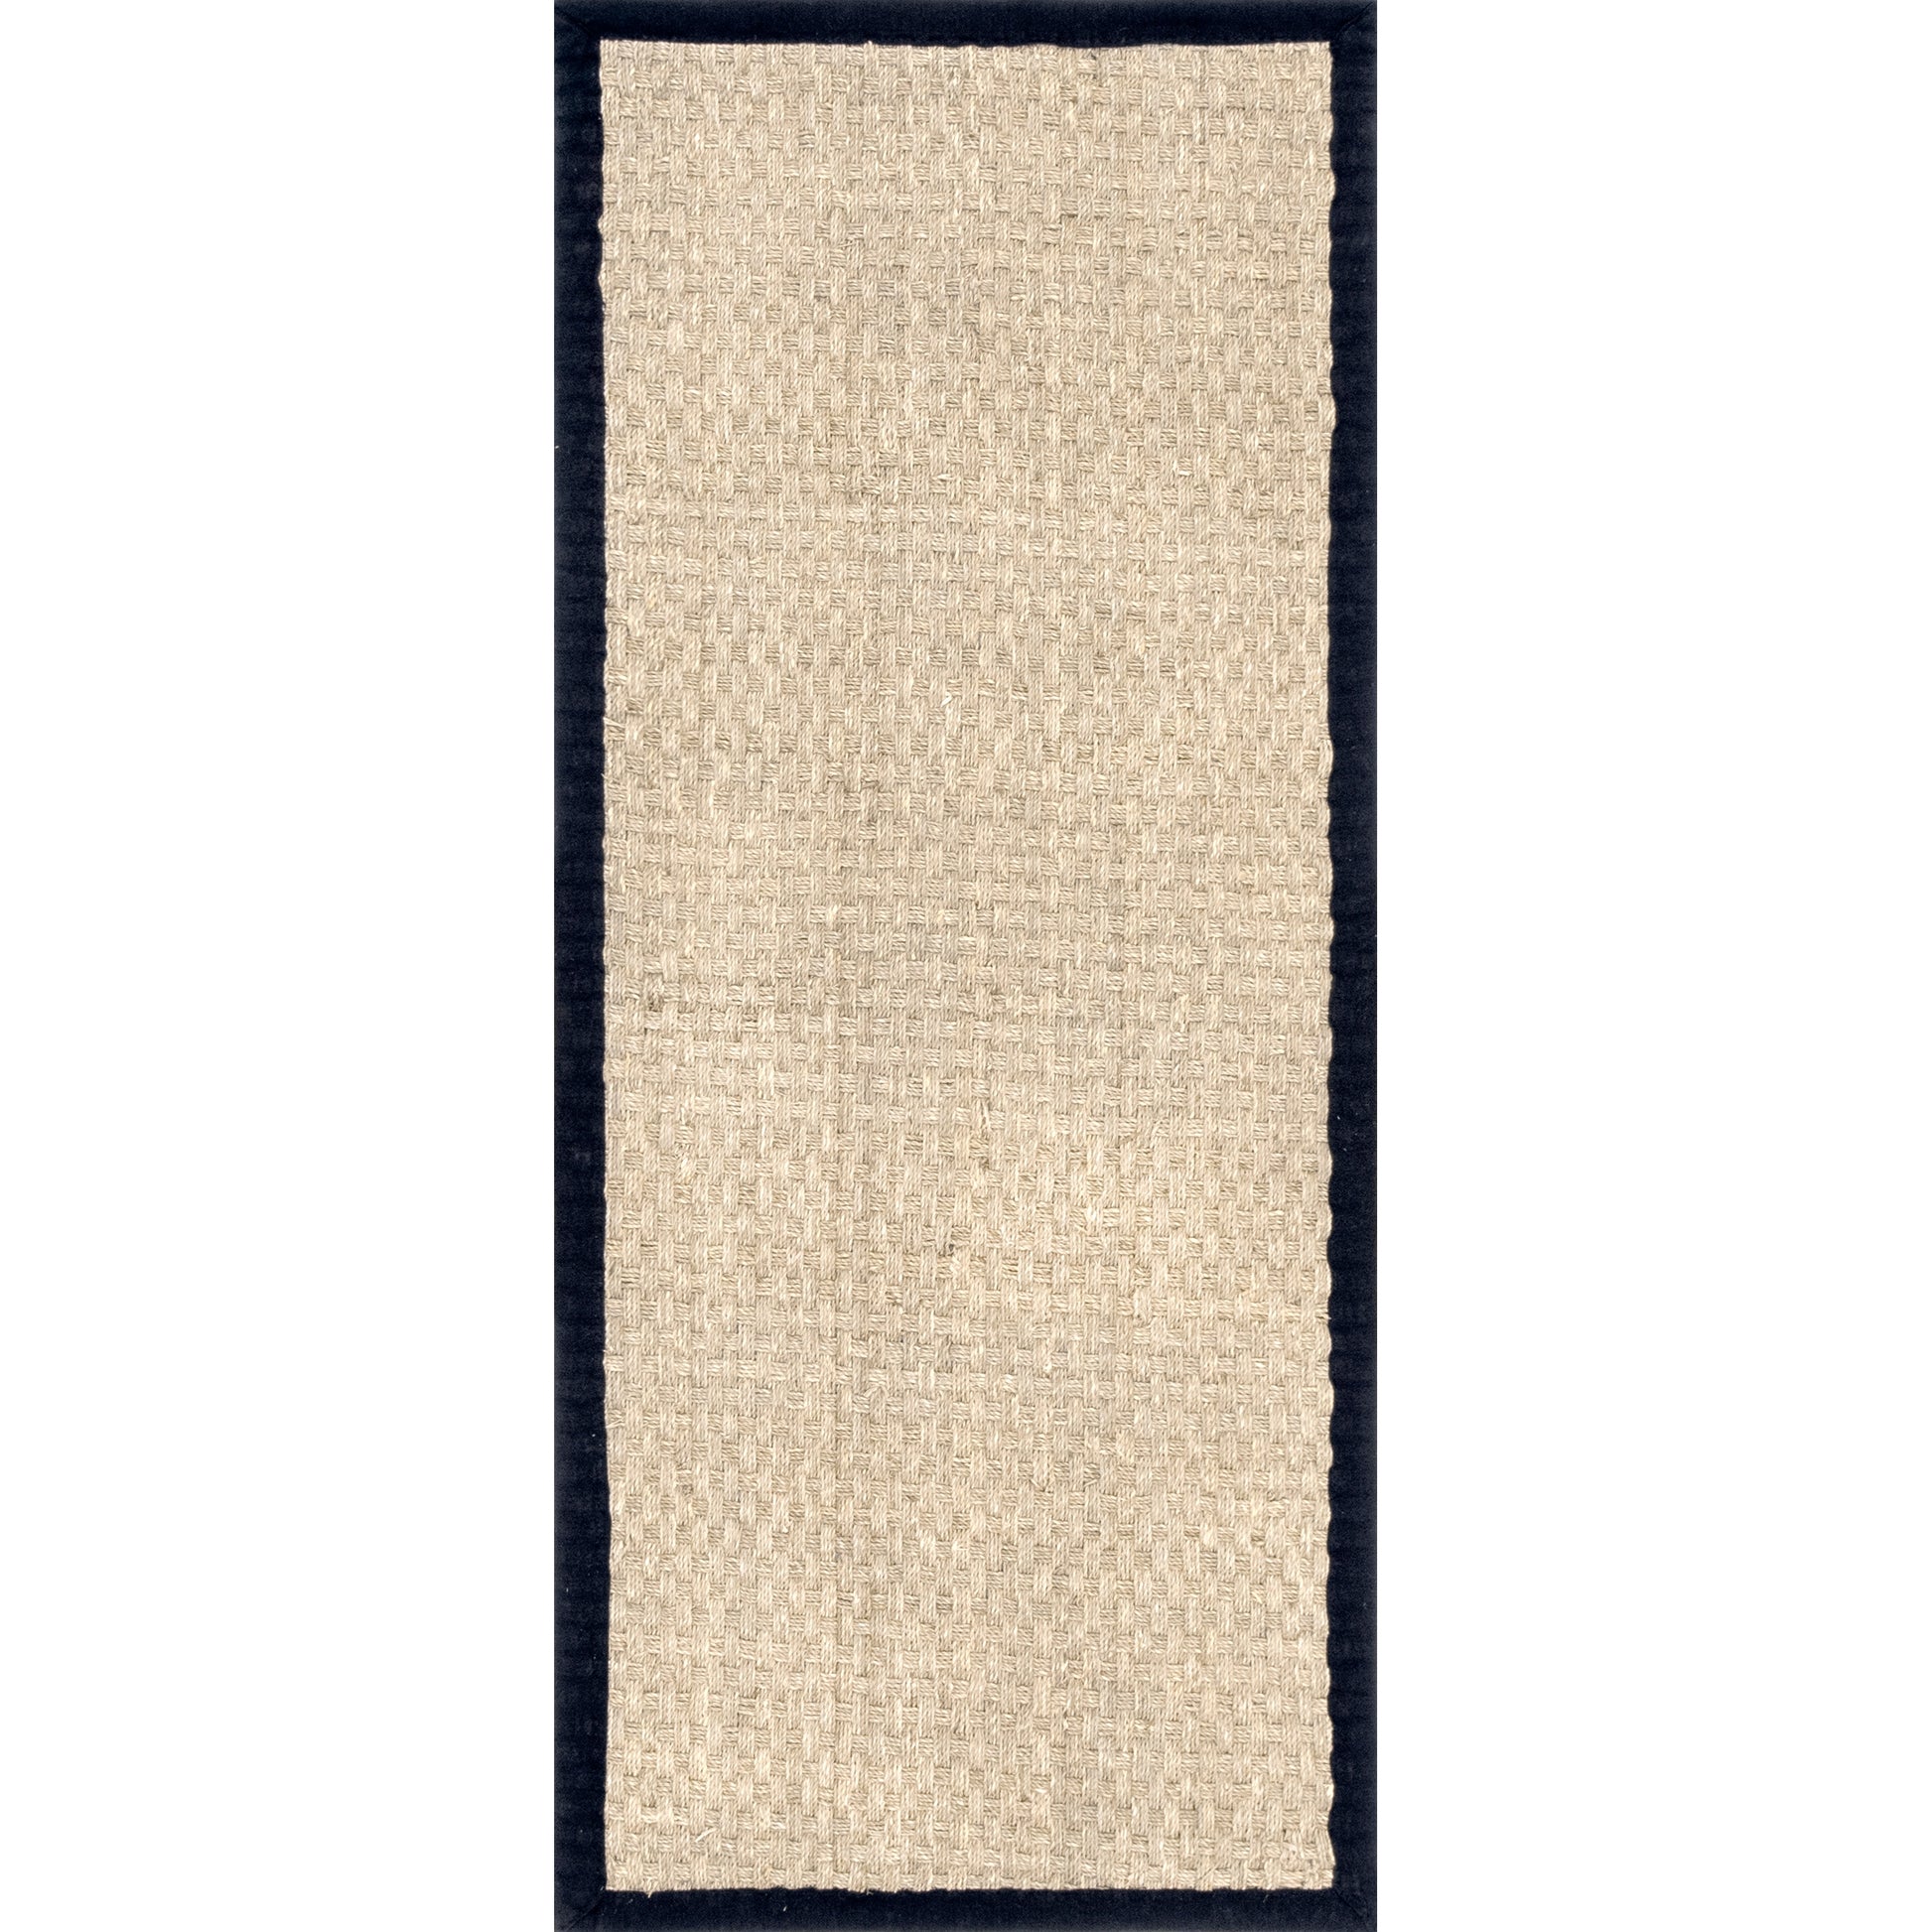 Nuloom Hesse Checker Weave Seagrass Nhe2029A Black Area Rug